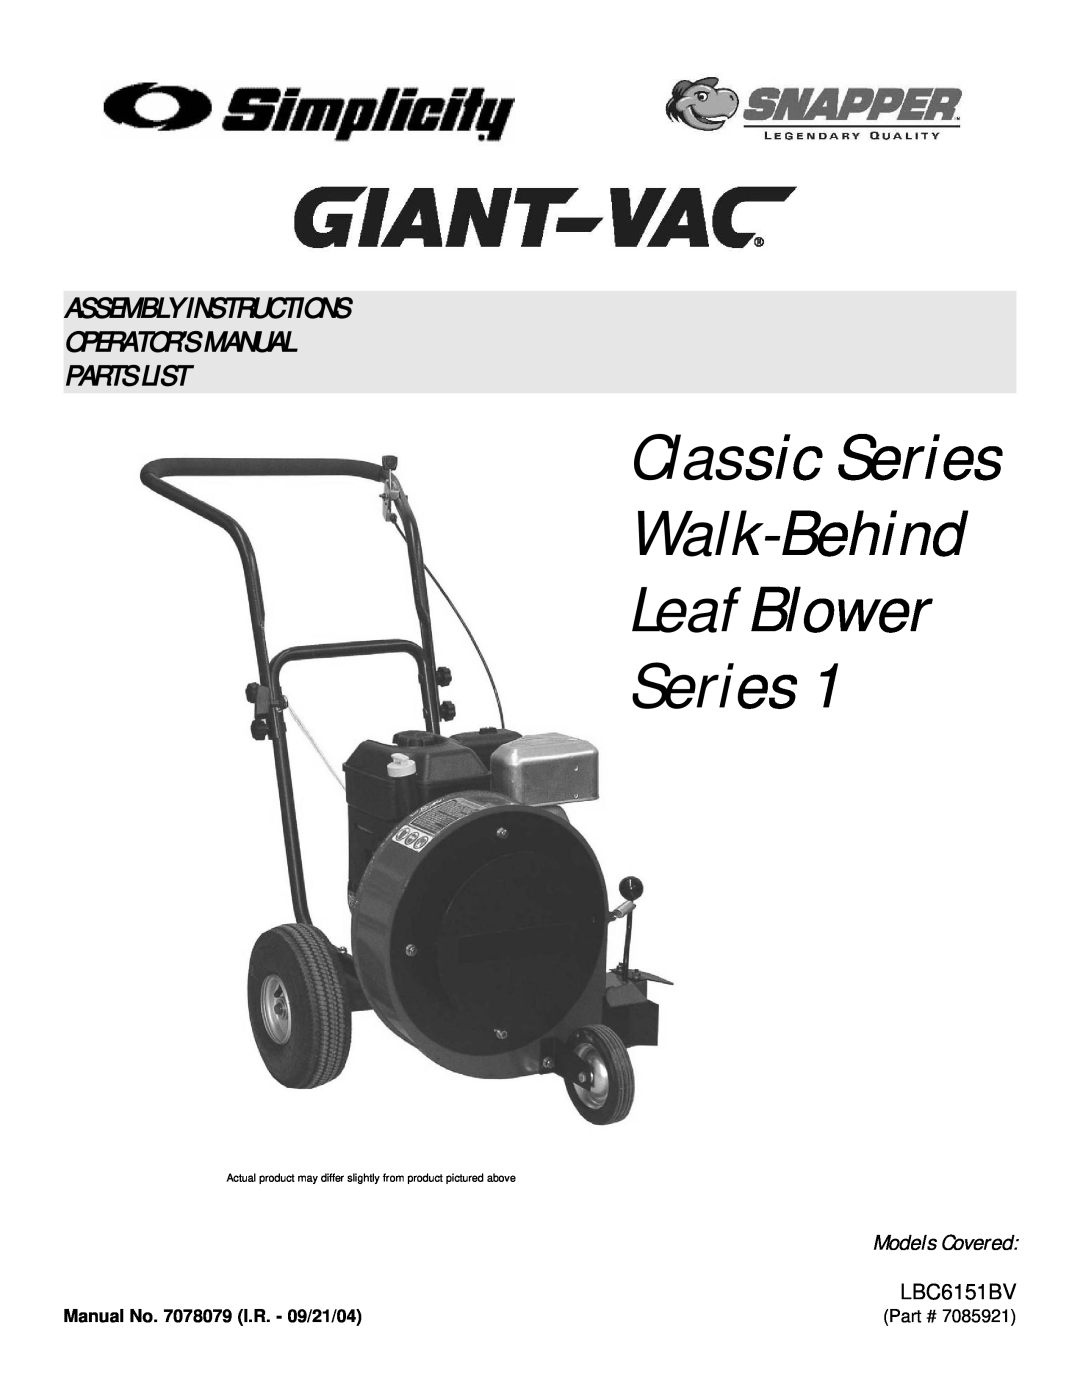 Snapper LBC6151BV manual Classic Series Walk-Behind Leaf Blower Series, Assembly Instructions Operator’S Manual 